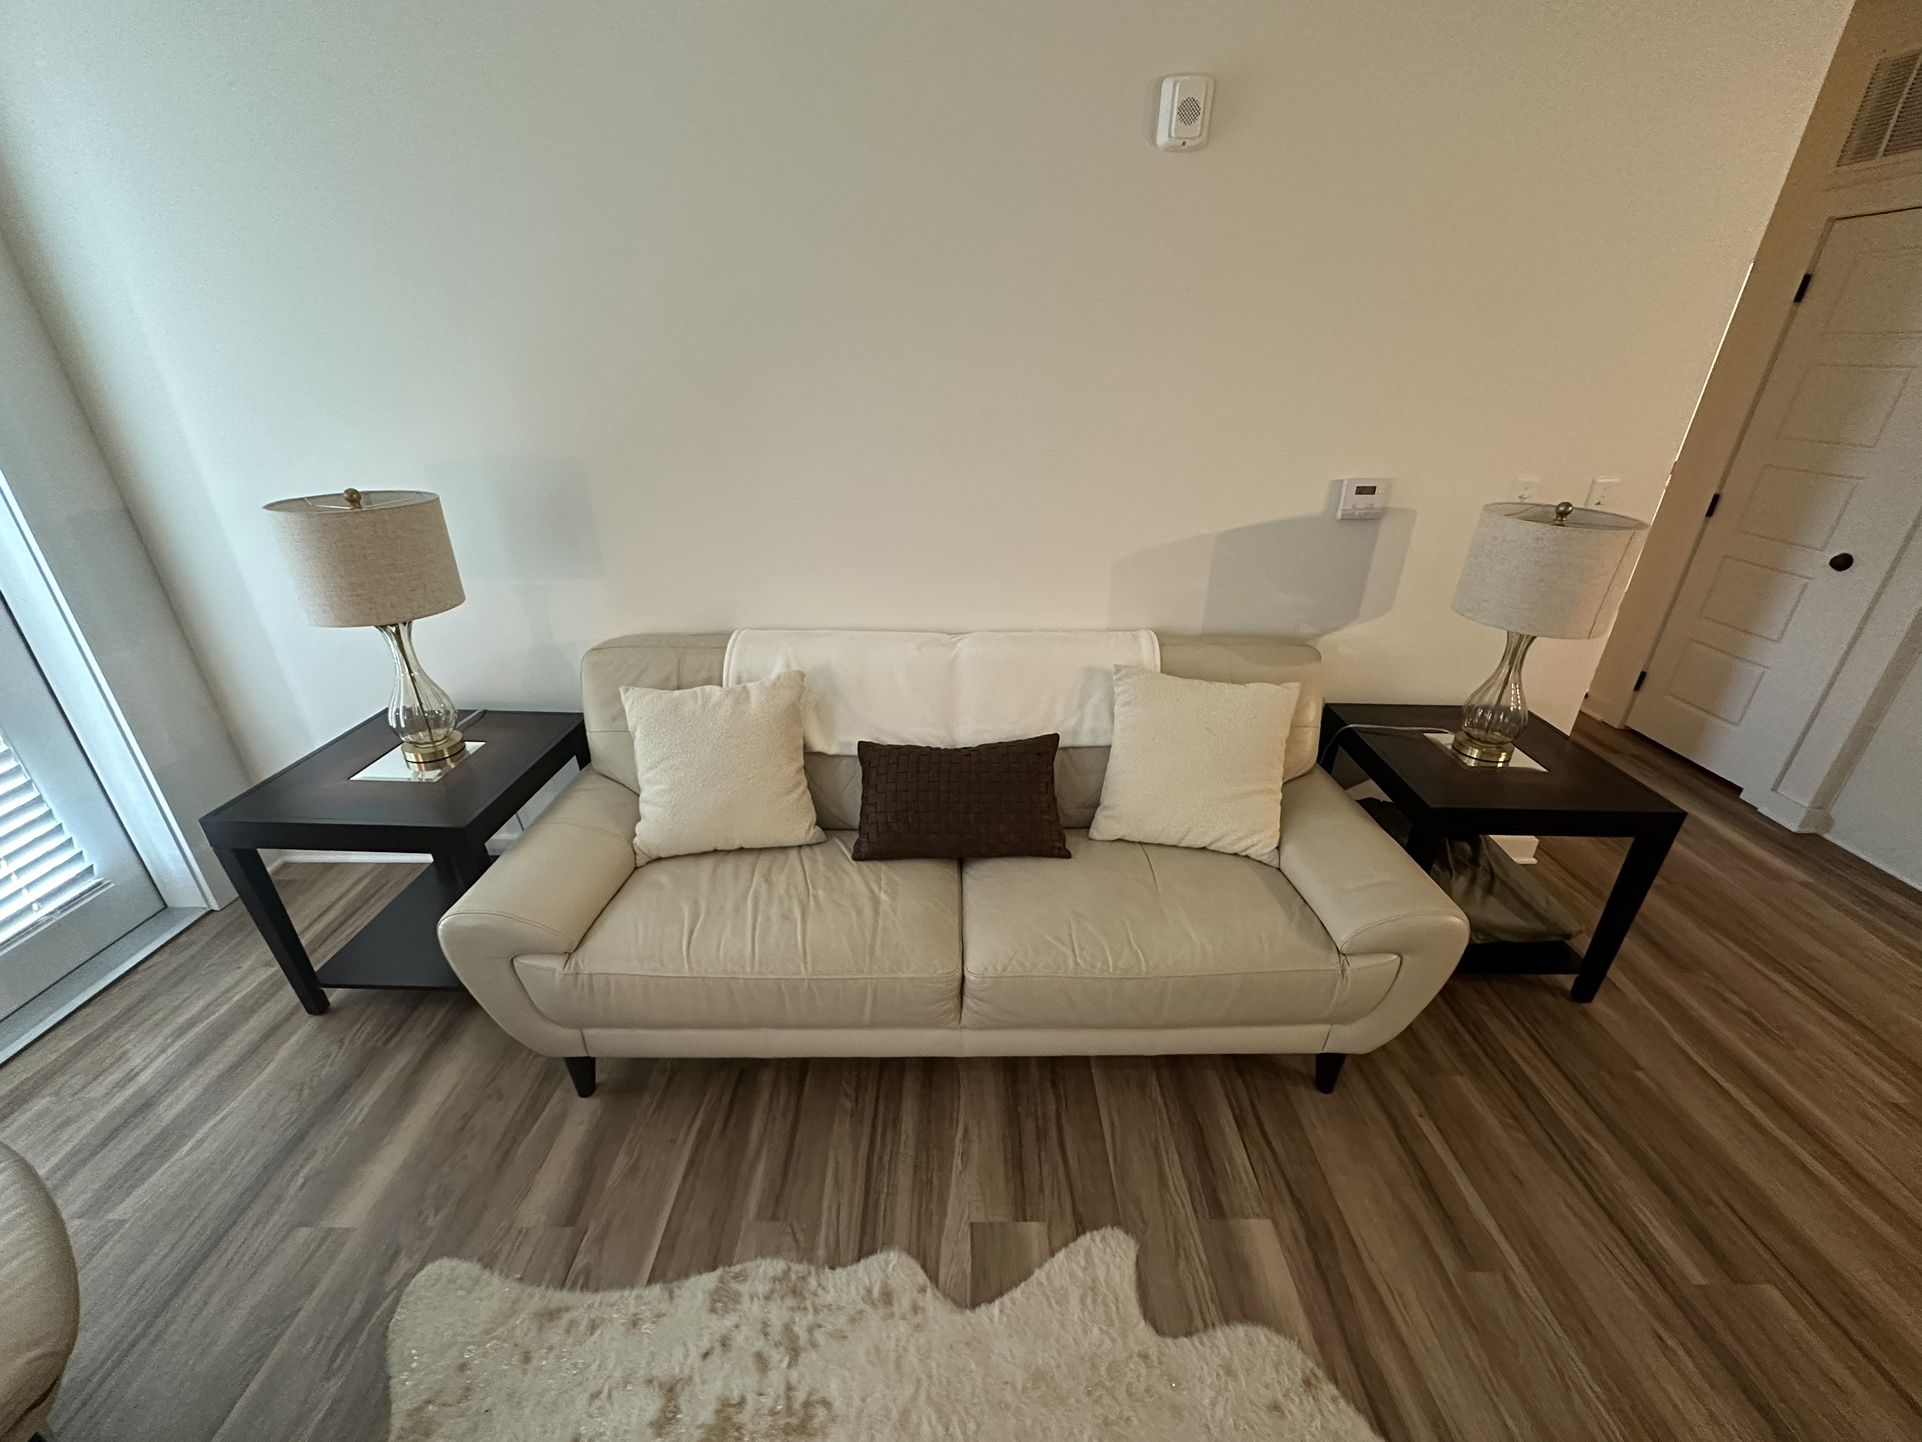 Beige Leather Sofa,  End Tables, and Lamps